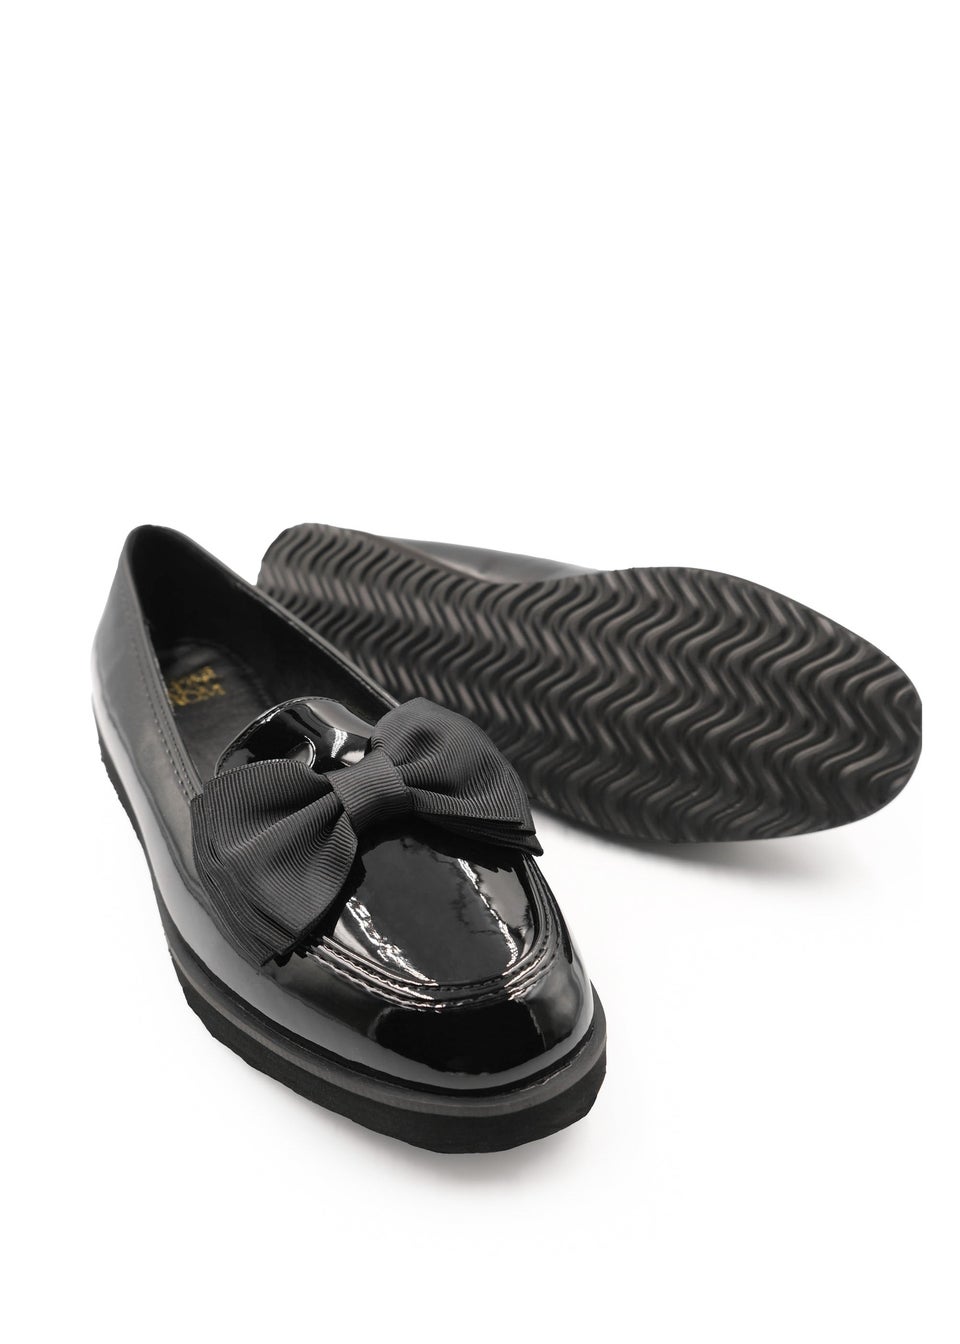 Where's That From Black Alpha Wide Fit Slip On Loafers